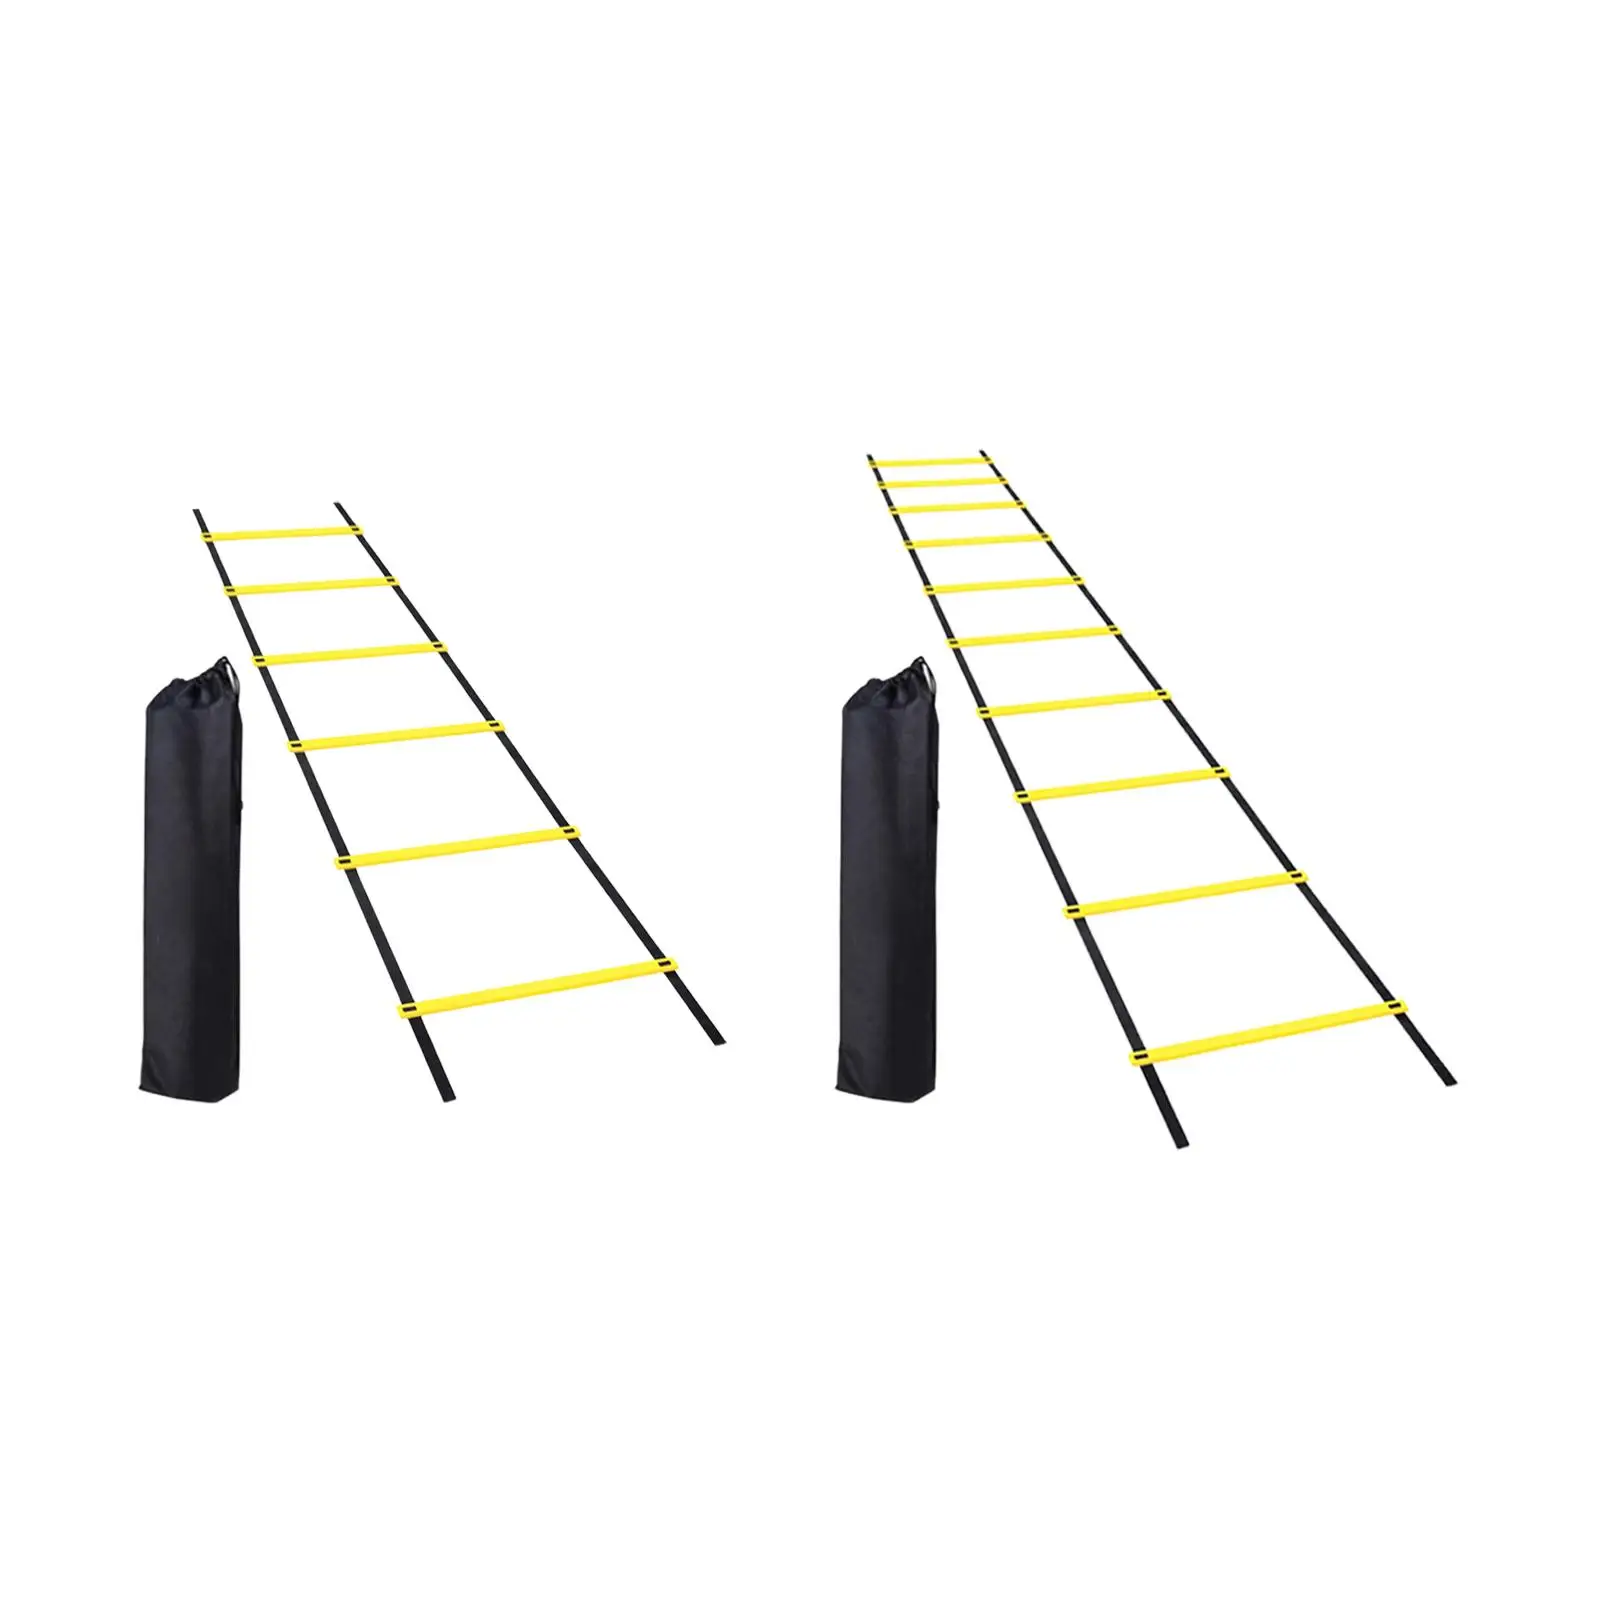 

Agility Ladder Footwork Training Balance Football Speed Training Equipment for Workout Volleyball Home Gym Rugby Outdoor Sports